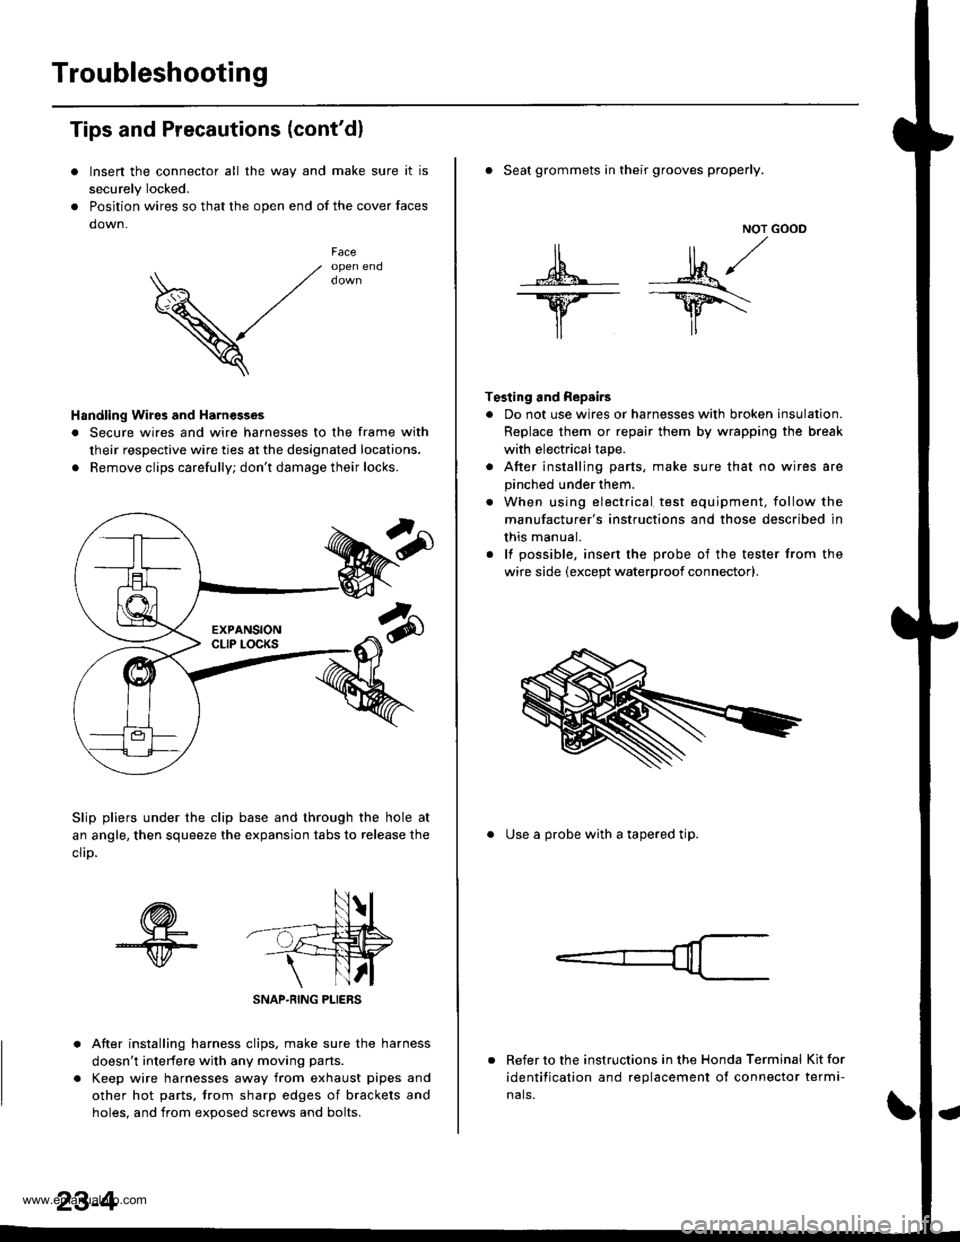 HONDA CR-V 2000 RD1-RD3 / 1.G Workshop Manual 
Troubleshooting
Tips and Precautions (contdl
Insen the connector all the way and make sure it is
securely Iocked.
Position wires so that the open end of the cover faces
down.
V
Faceopen end
Handling